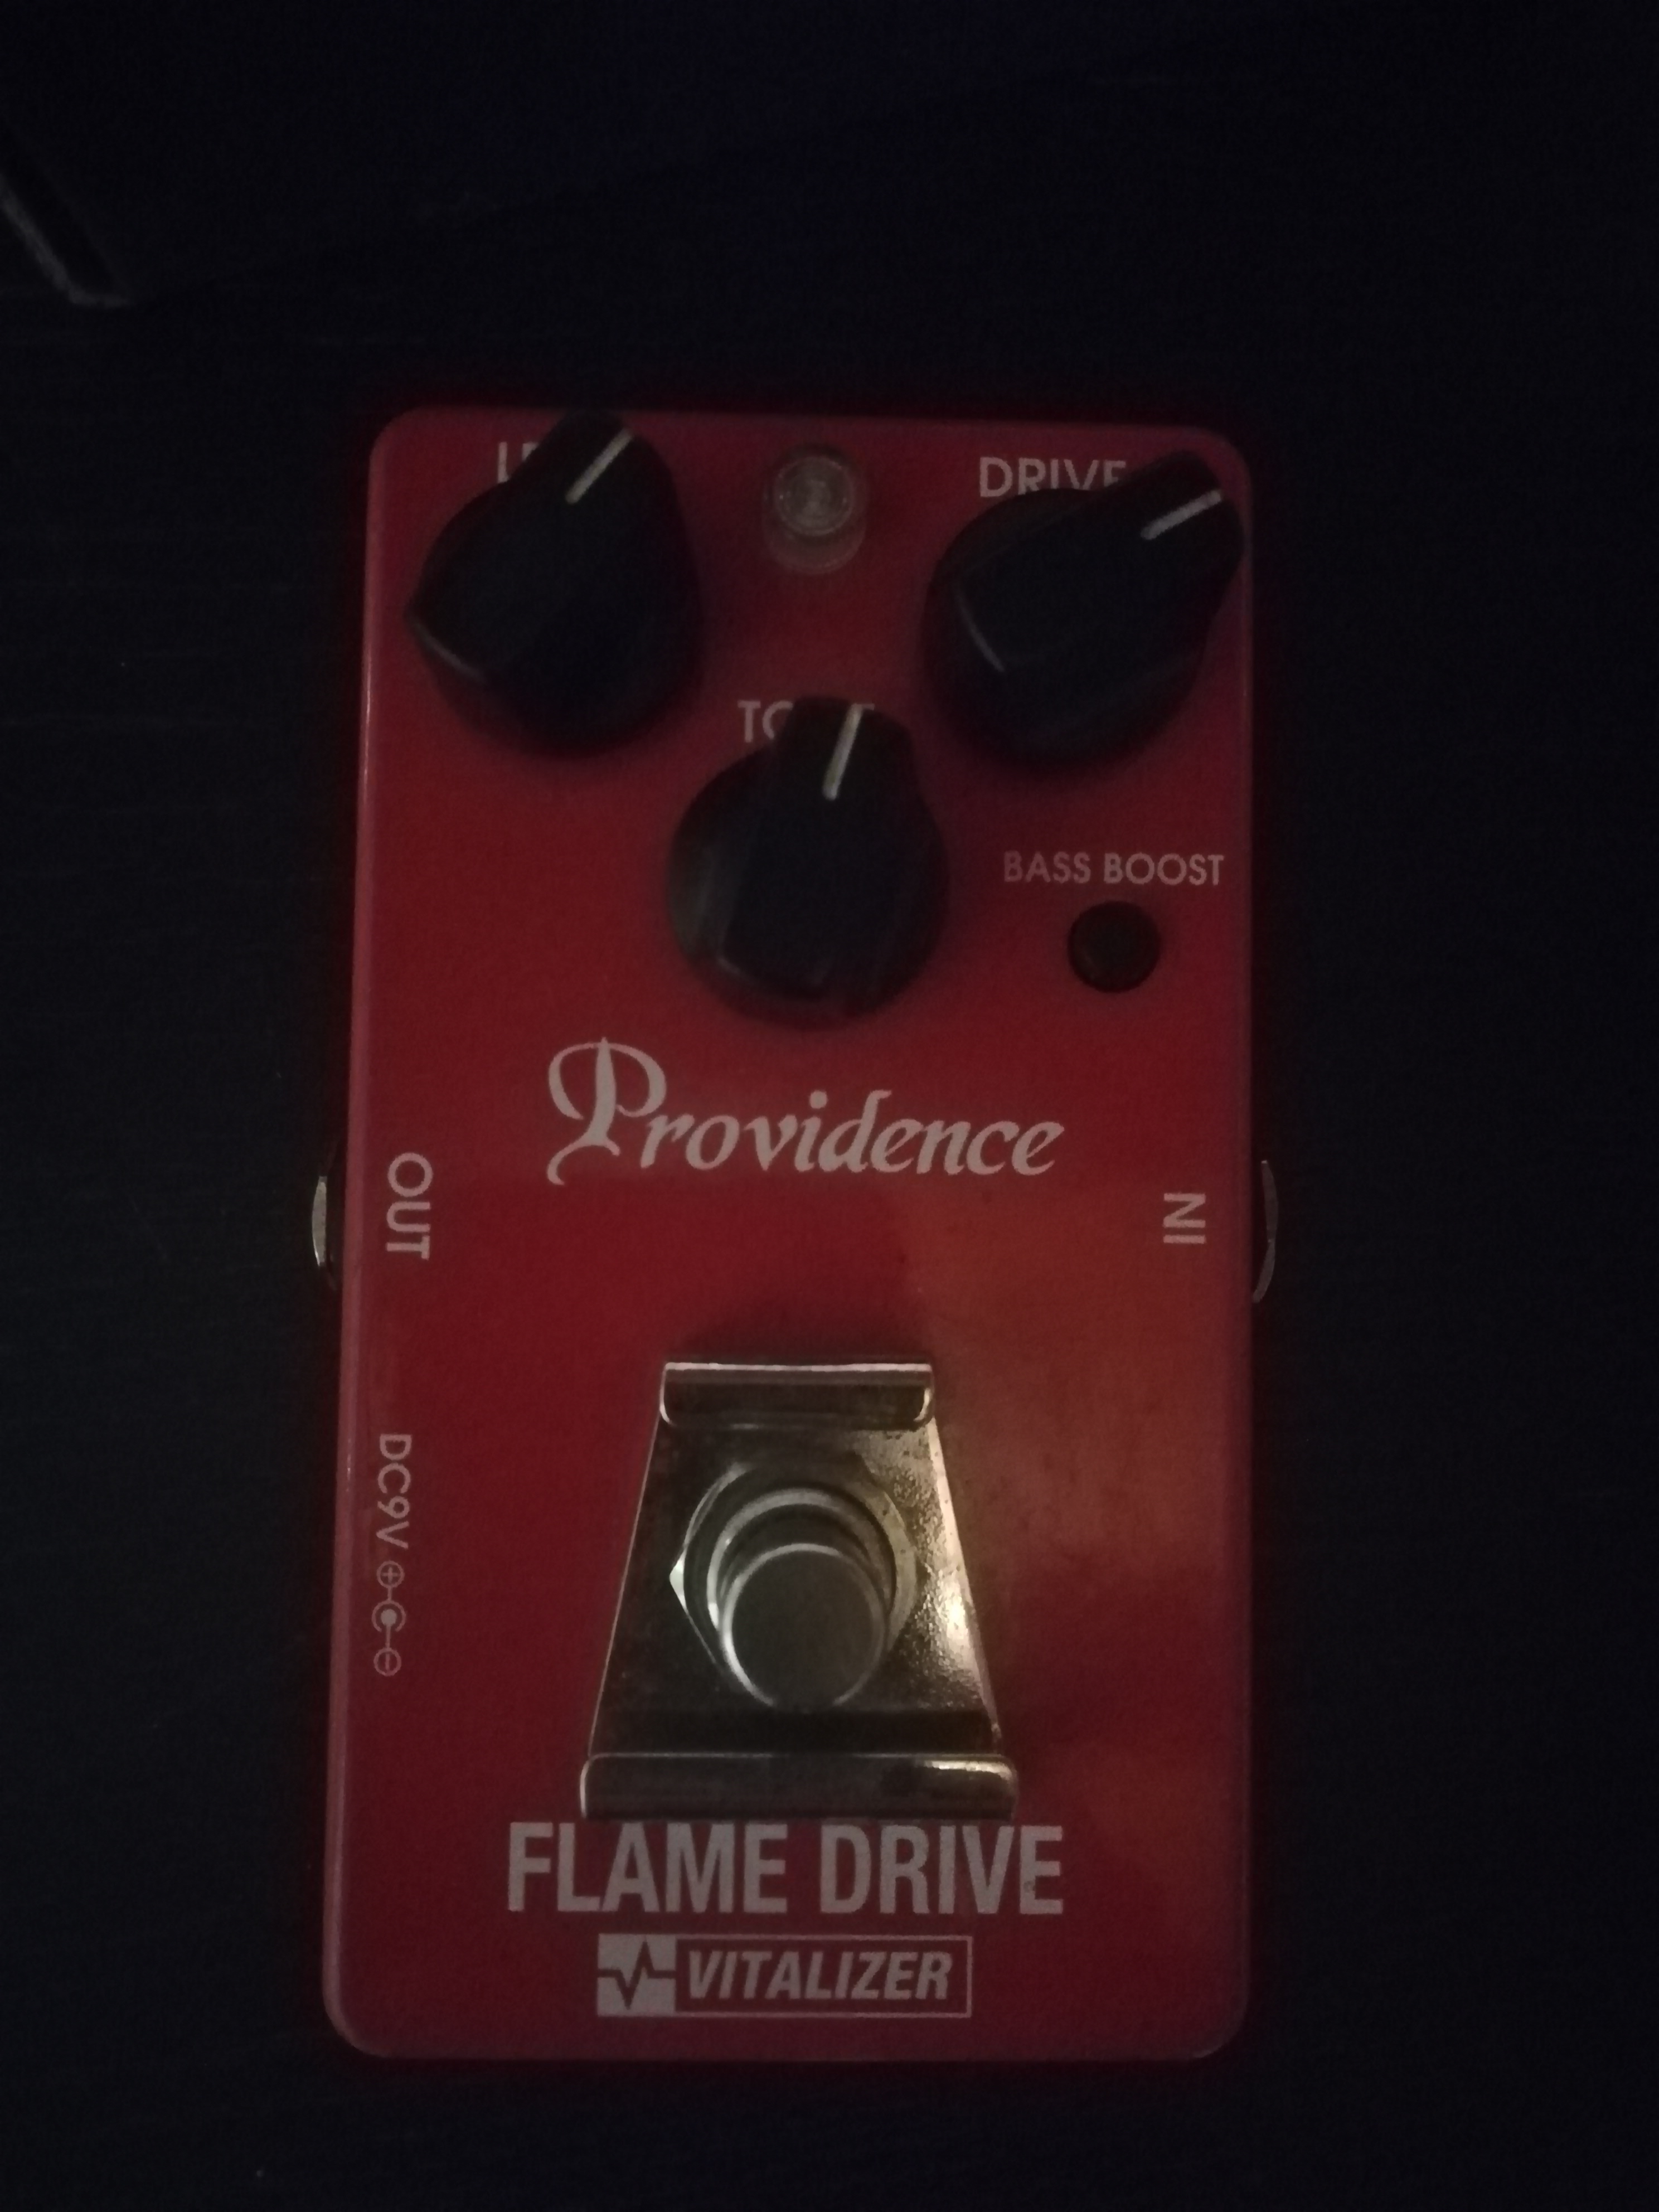 Flame Drive FDR-1F - Providence Flame Drive FDR-1F - Audiofanzine